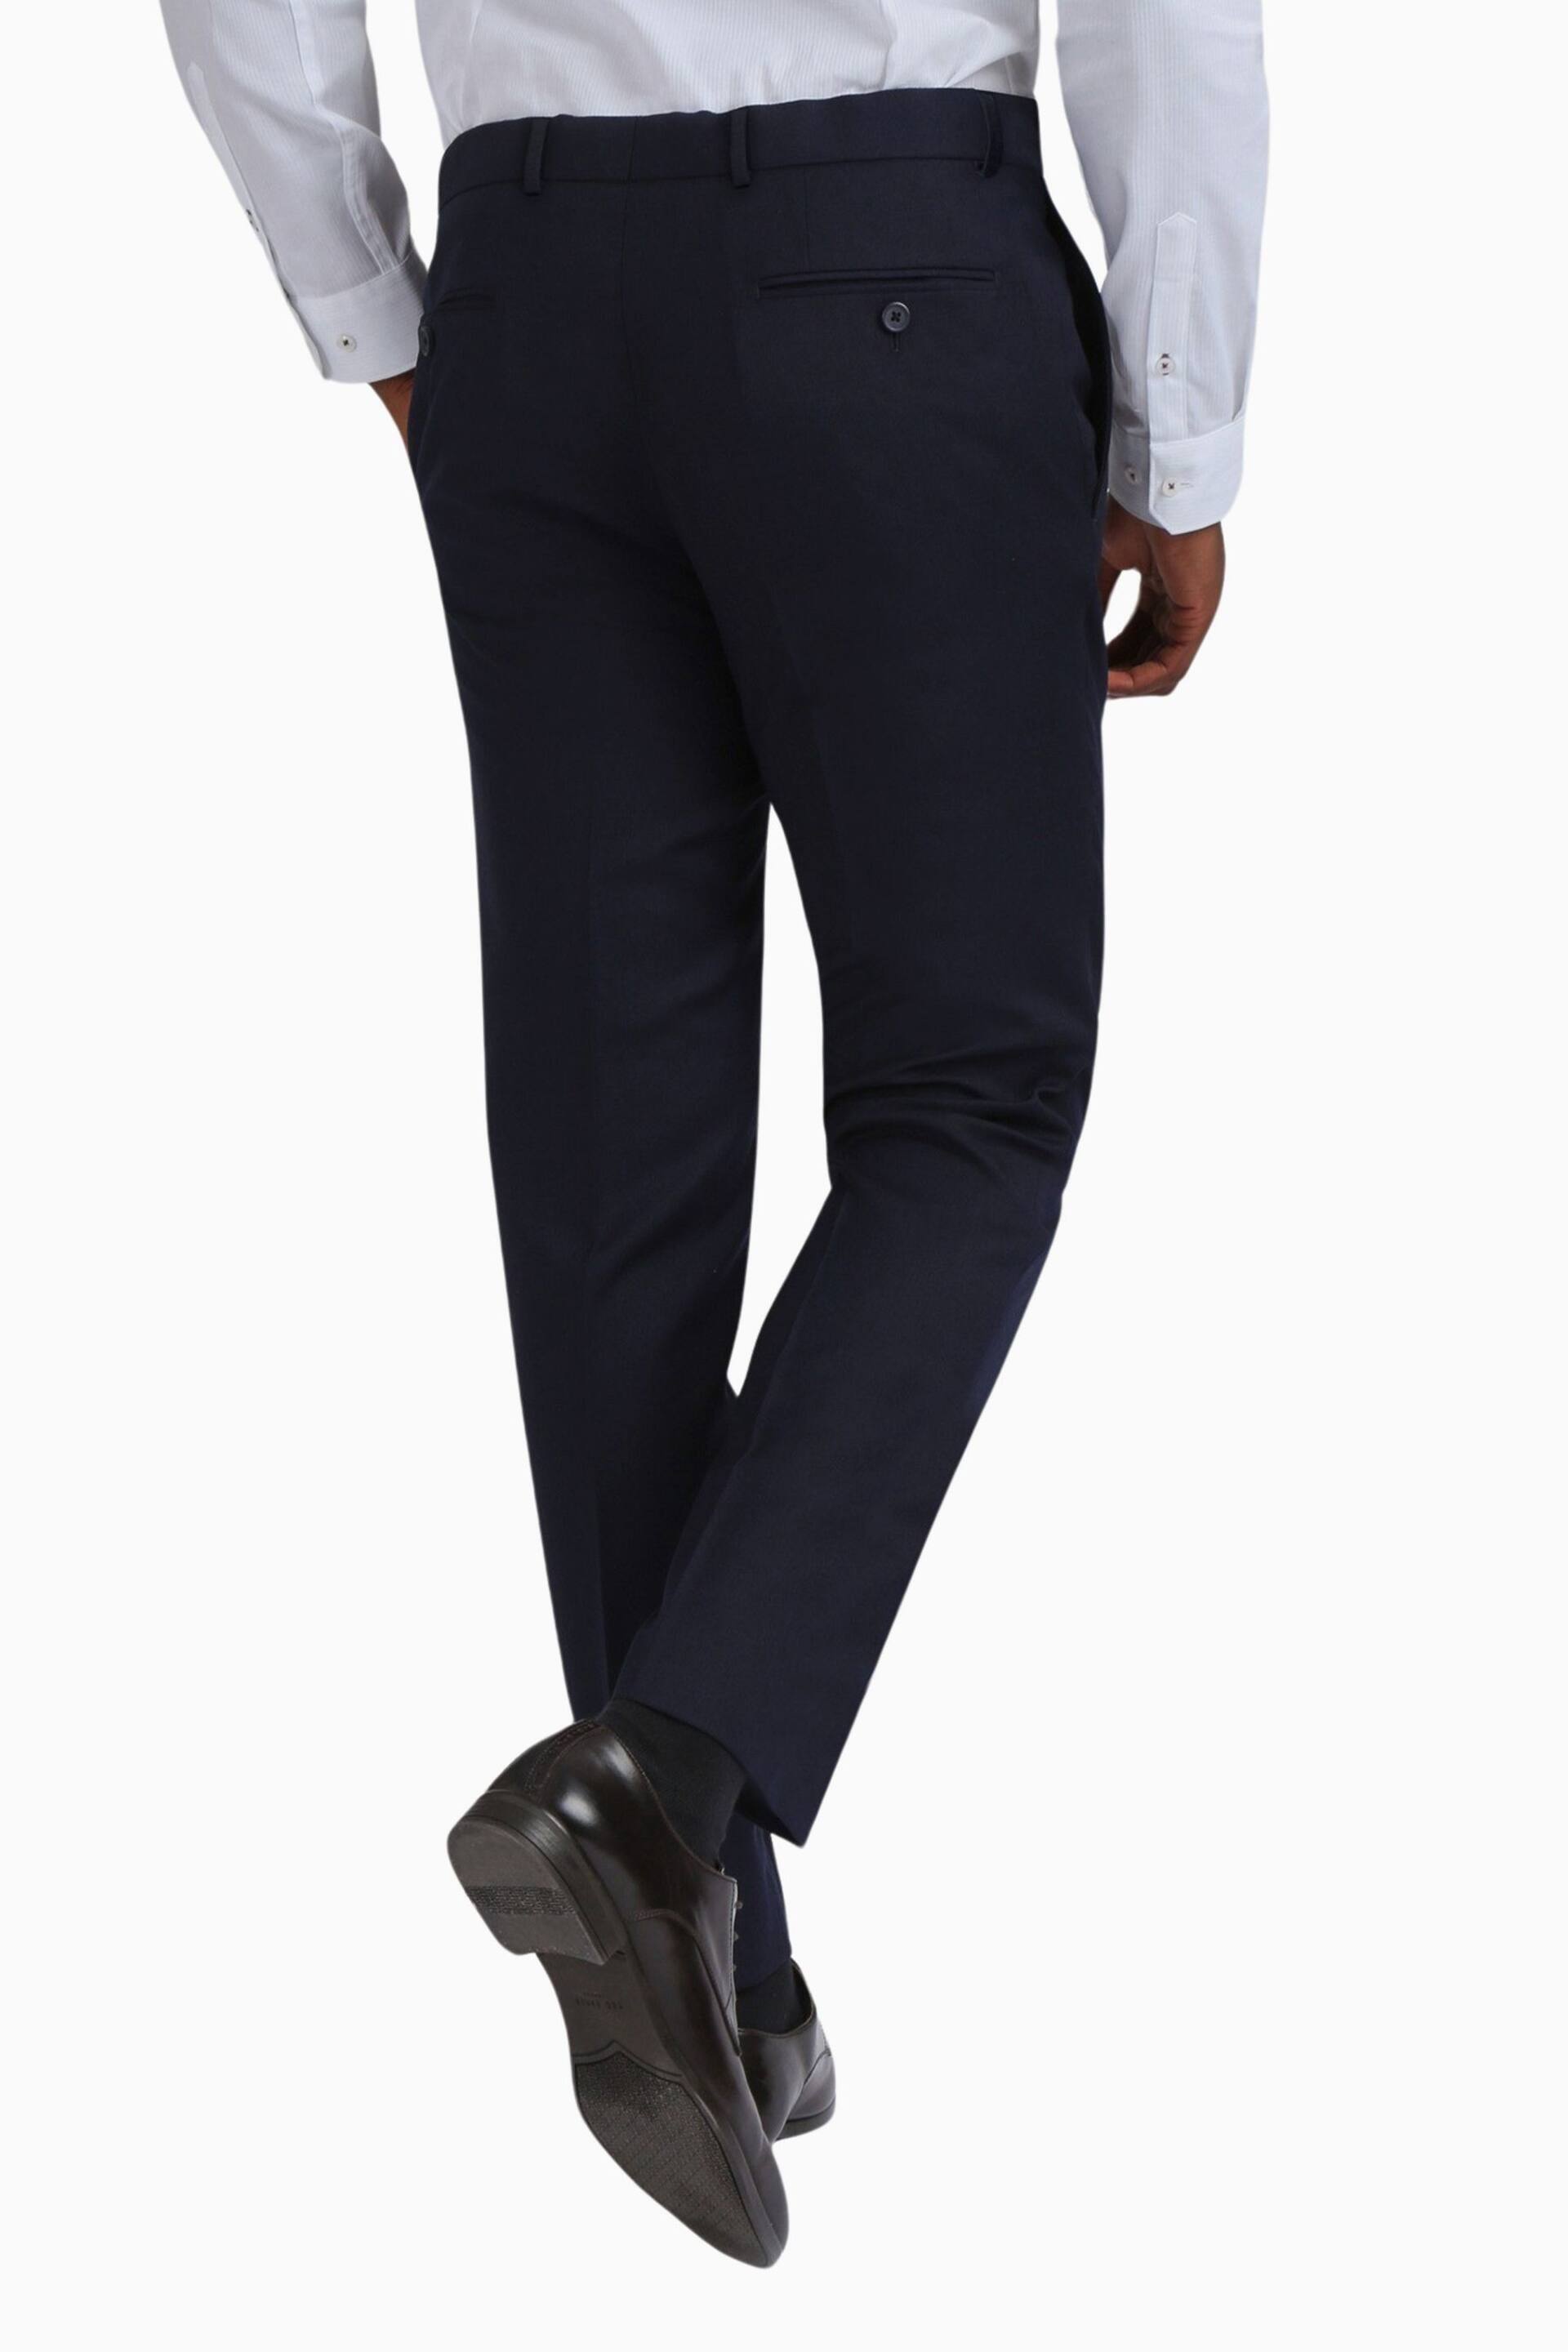 Ted Baker Tailoring Blue Slim Fit Tuxedo Trousers - Image 2 of 3